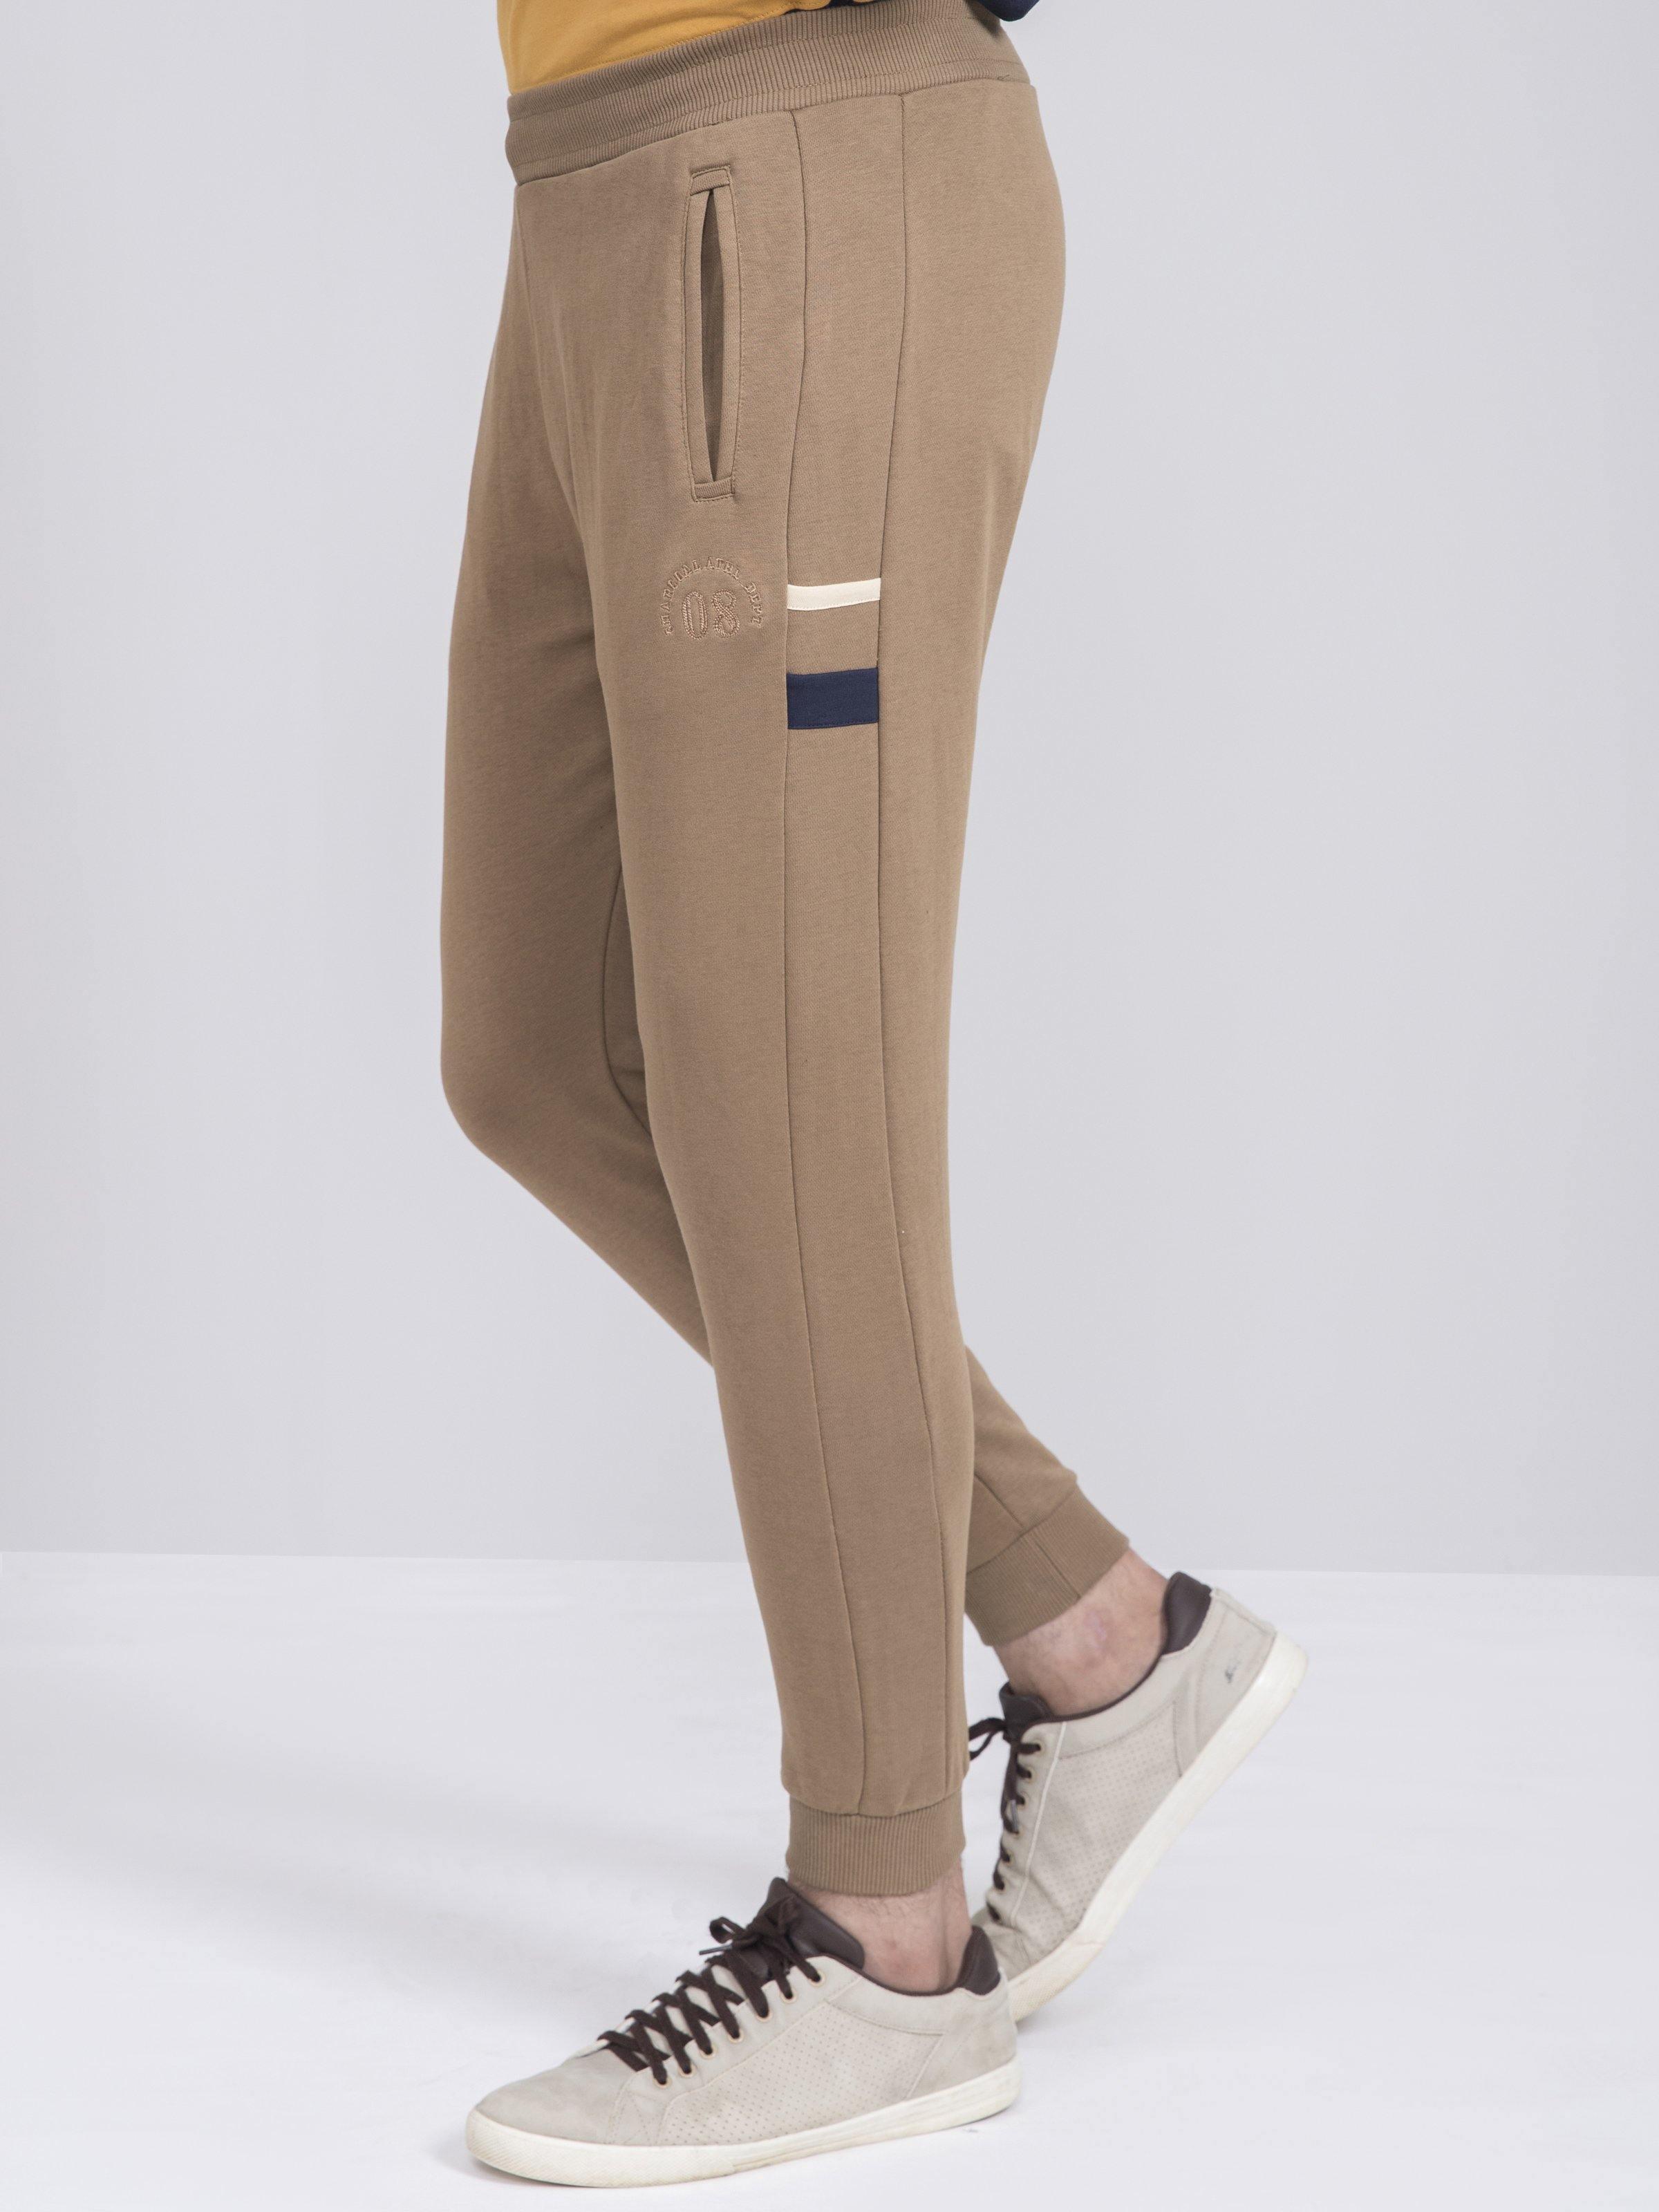 TERRY SLIM FIT DARK KHAKI TROUSER at Charcoal Clothing